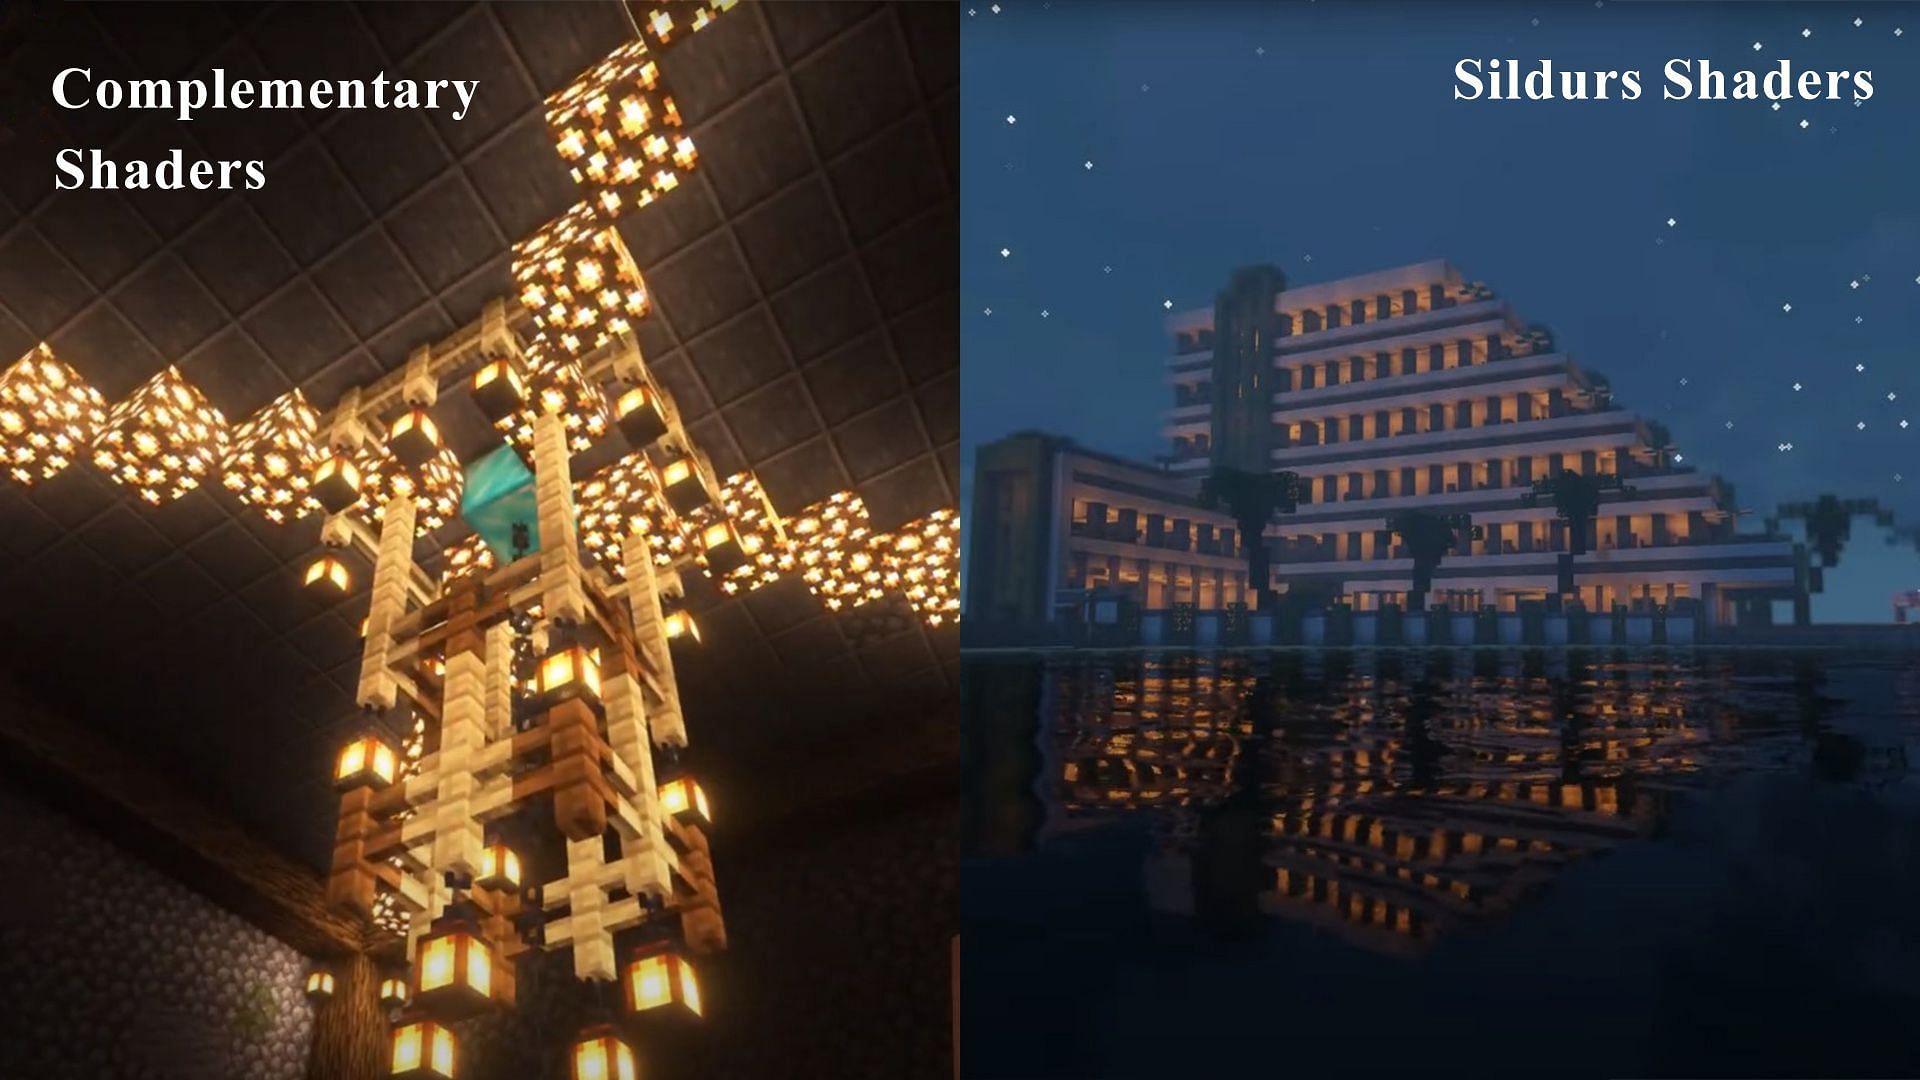 Complementary Shaders vs Sildurs Shaders